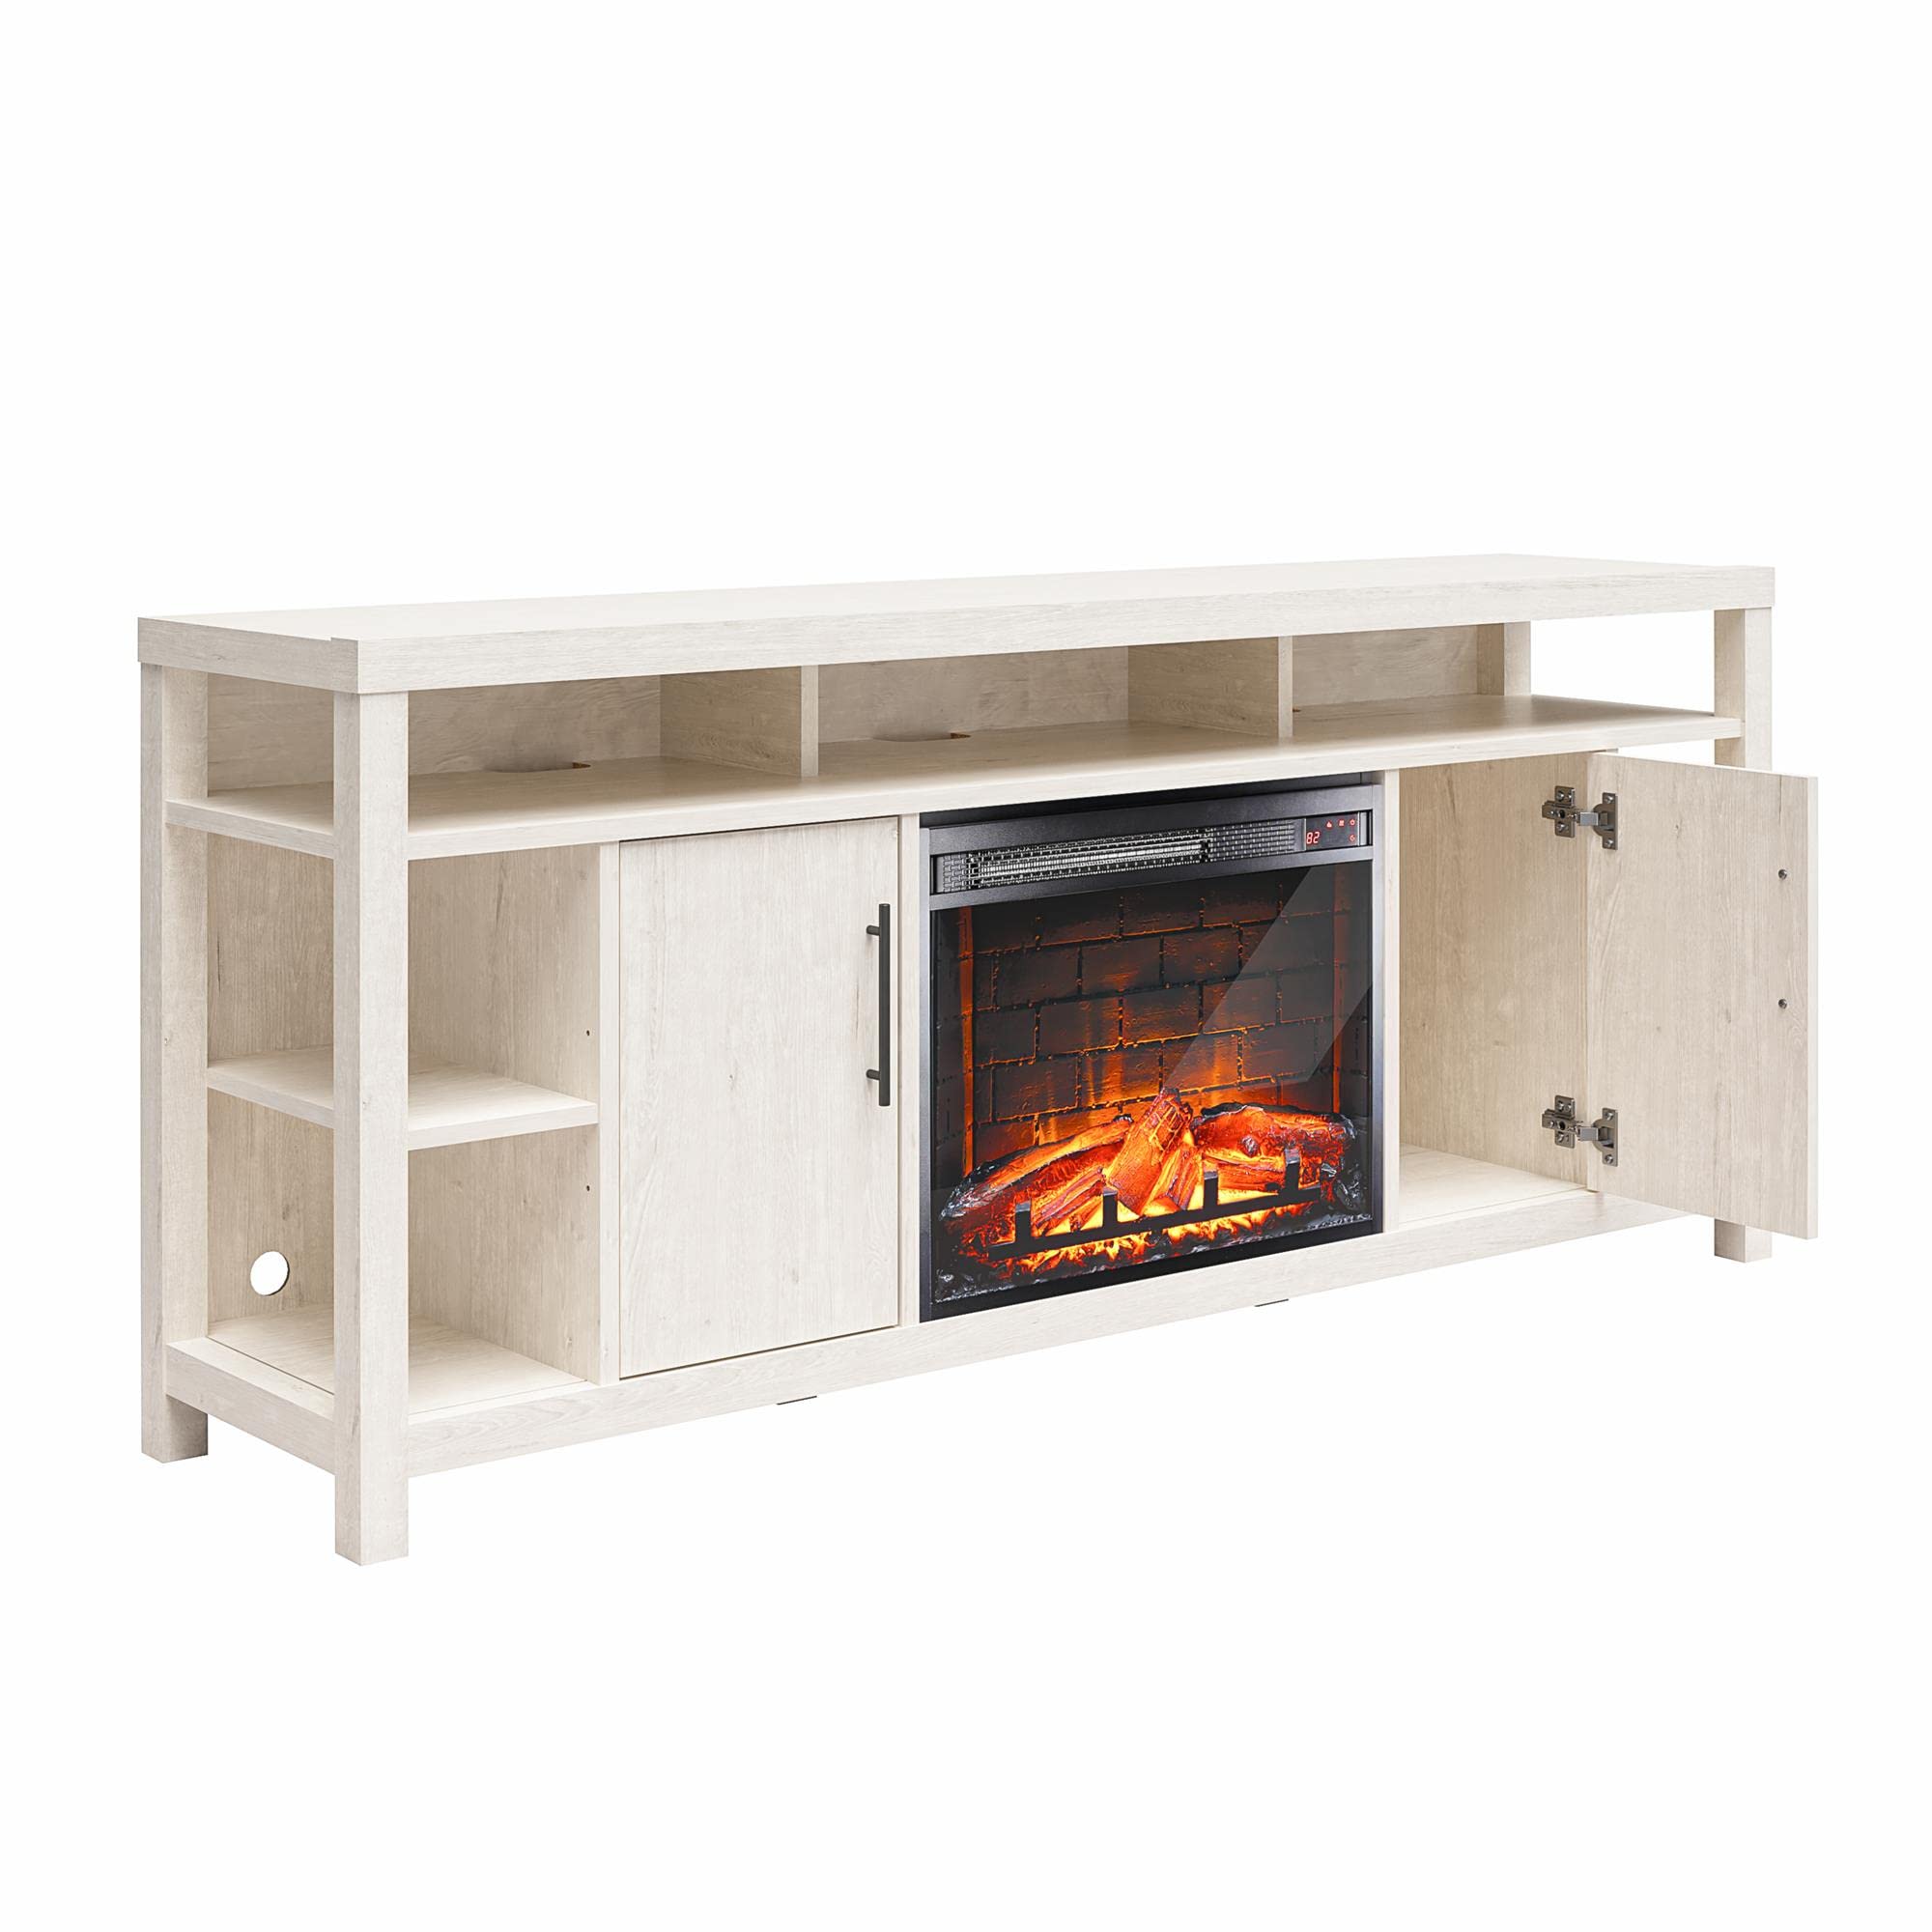 Ameriwood Home Garrick Electric Fireplace Console for TVs up to 75", Ivory Oak